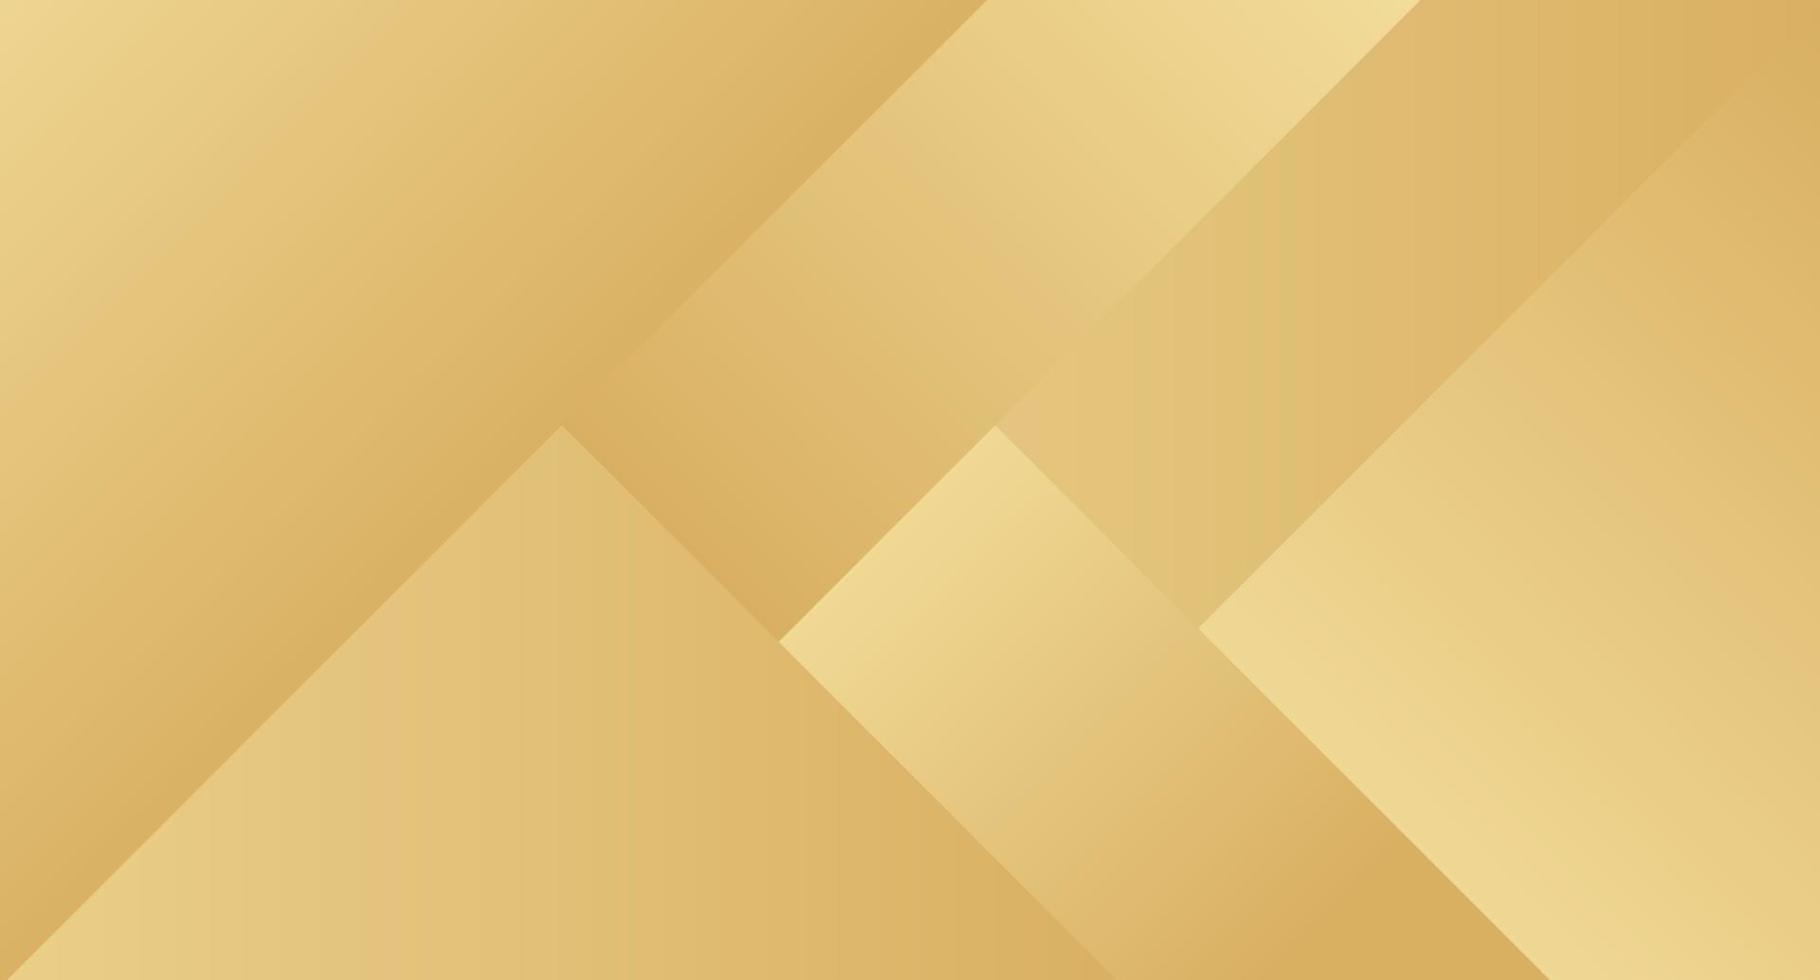 Gold background. Abstract gold gradient background. Abstract gold vector background with stripes. Vector illustration